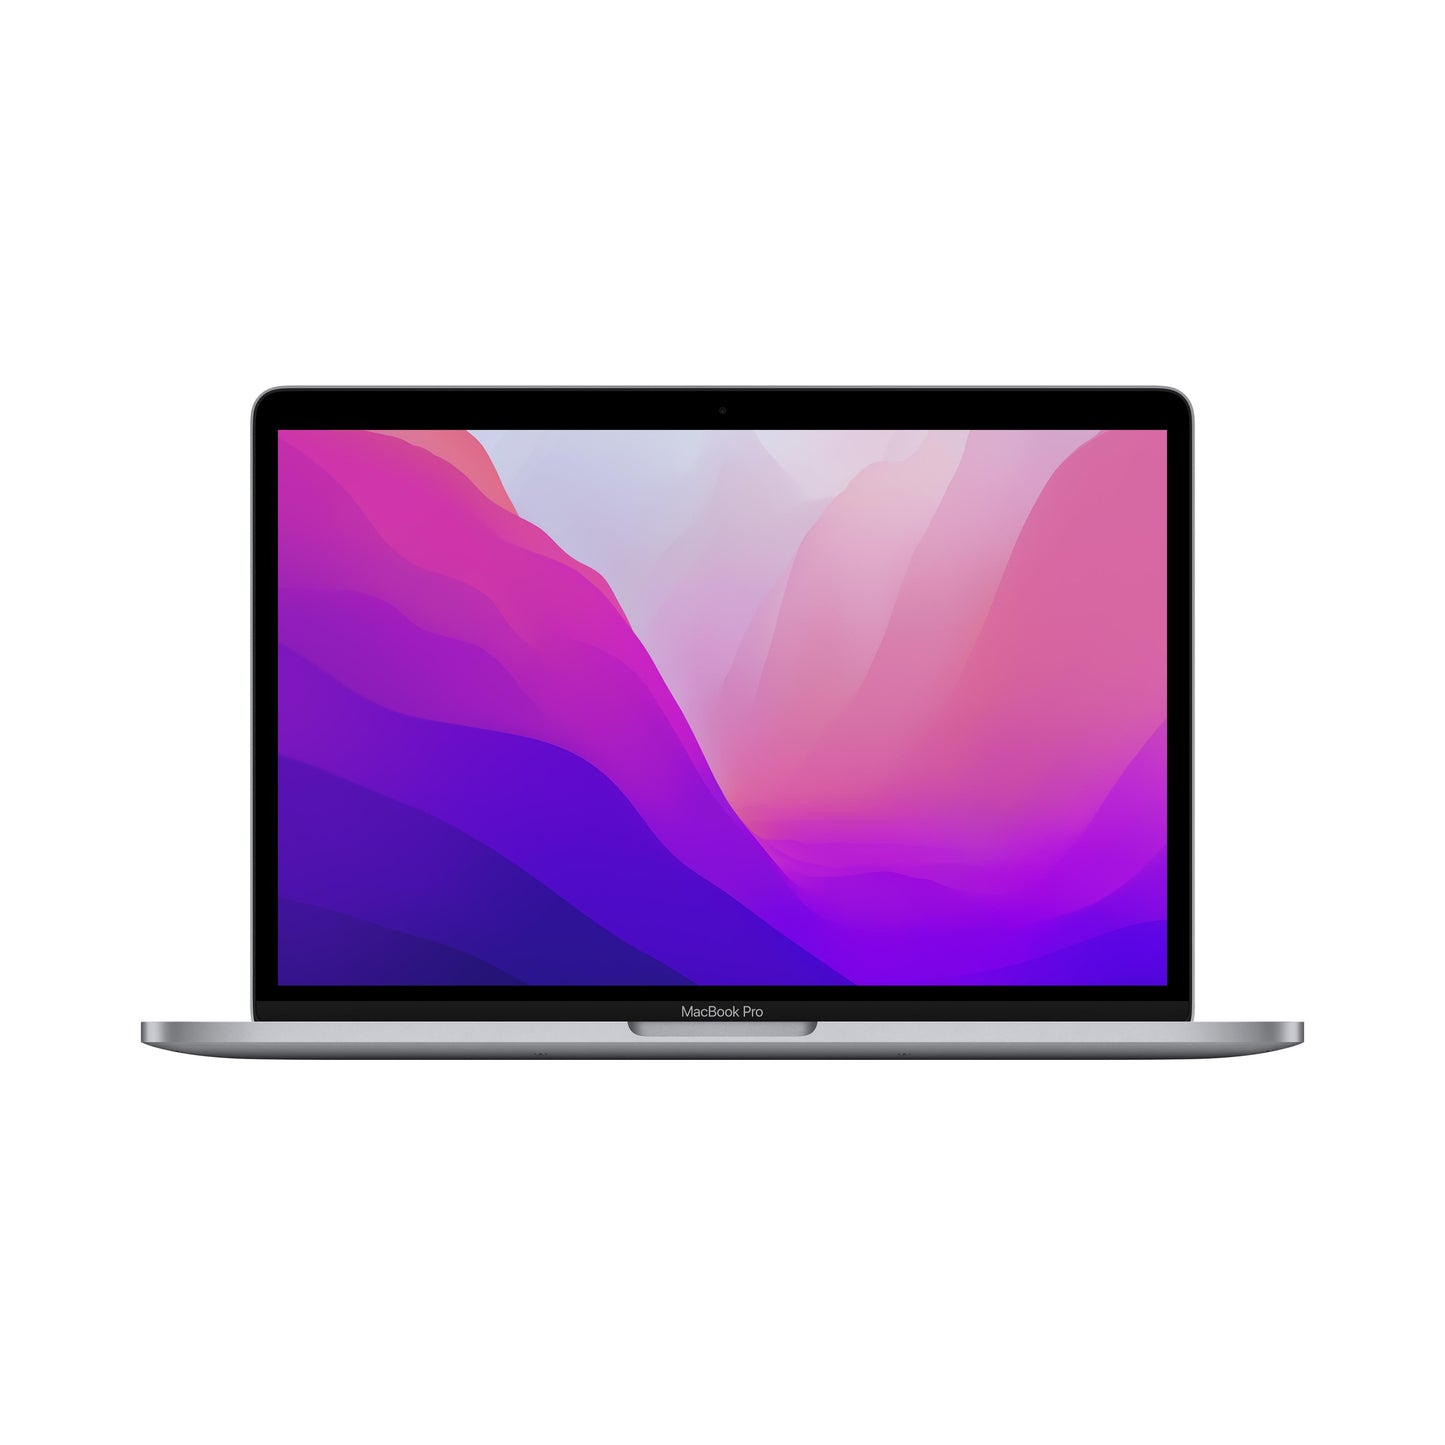 13-inch MacBook Pro: Apple M2 chip with 8‑core CPU and 10‑core GPU, 512GB SSD - Space Grey